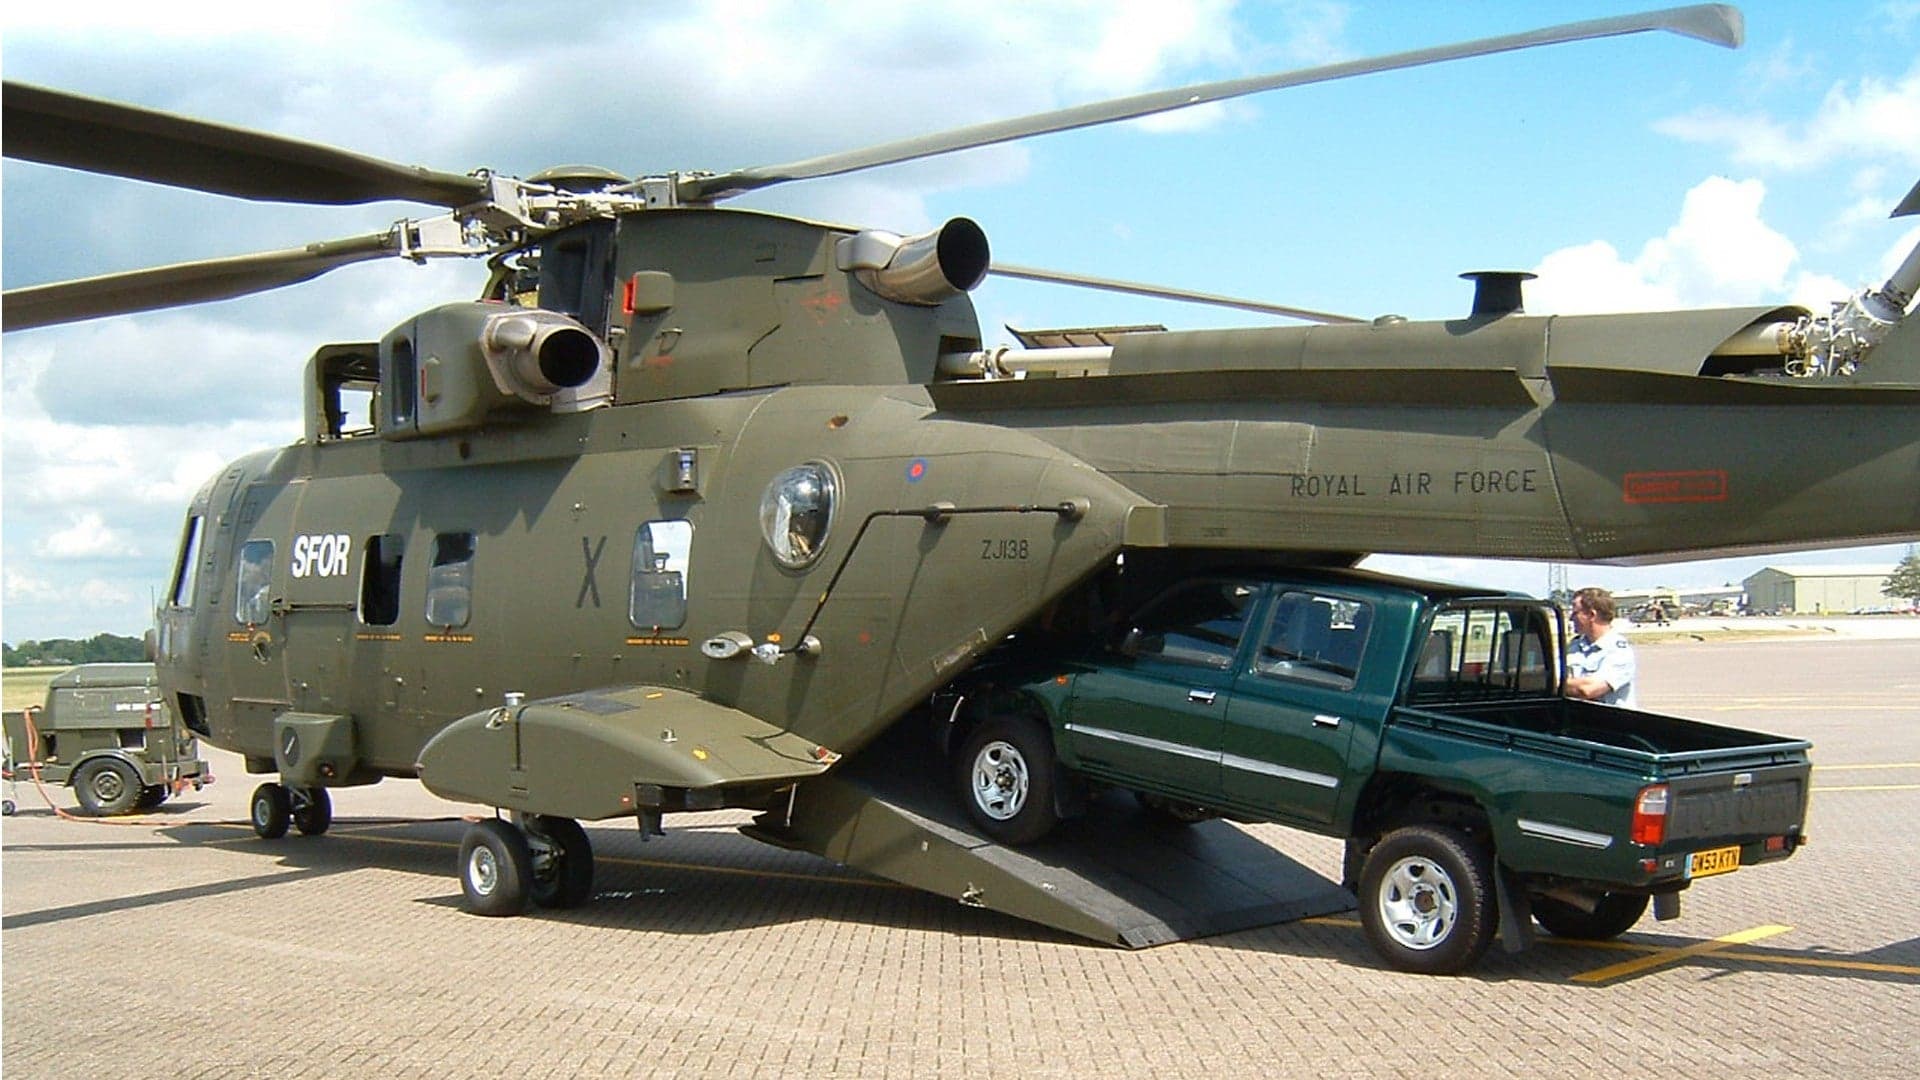 The 2004 Toyota Hilux Could Do Many Cool Things, Like Fit in a British RAF Helicopter